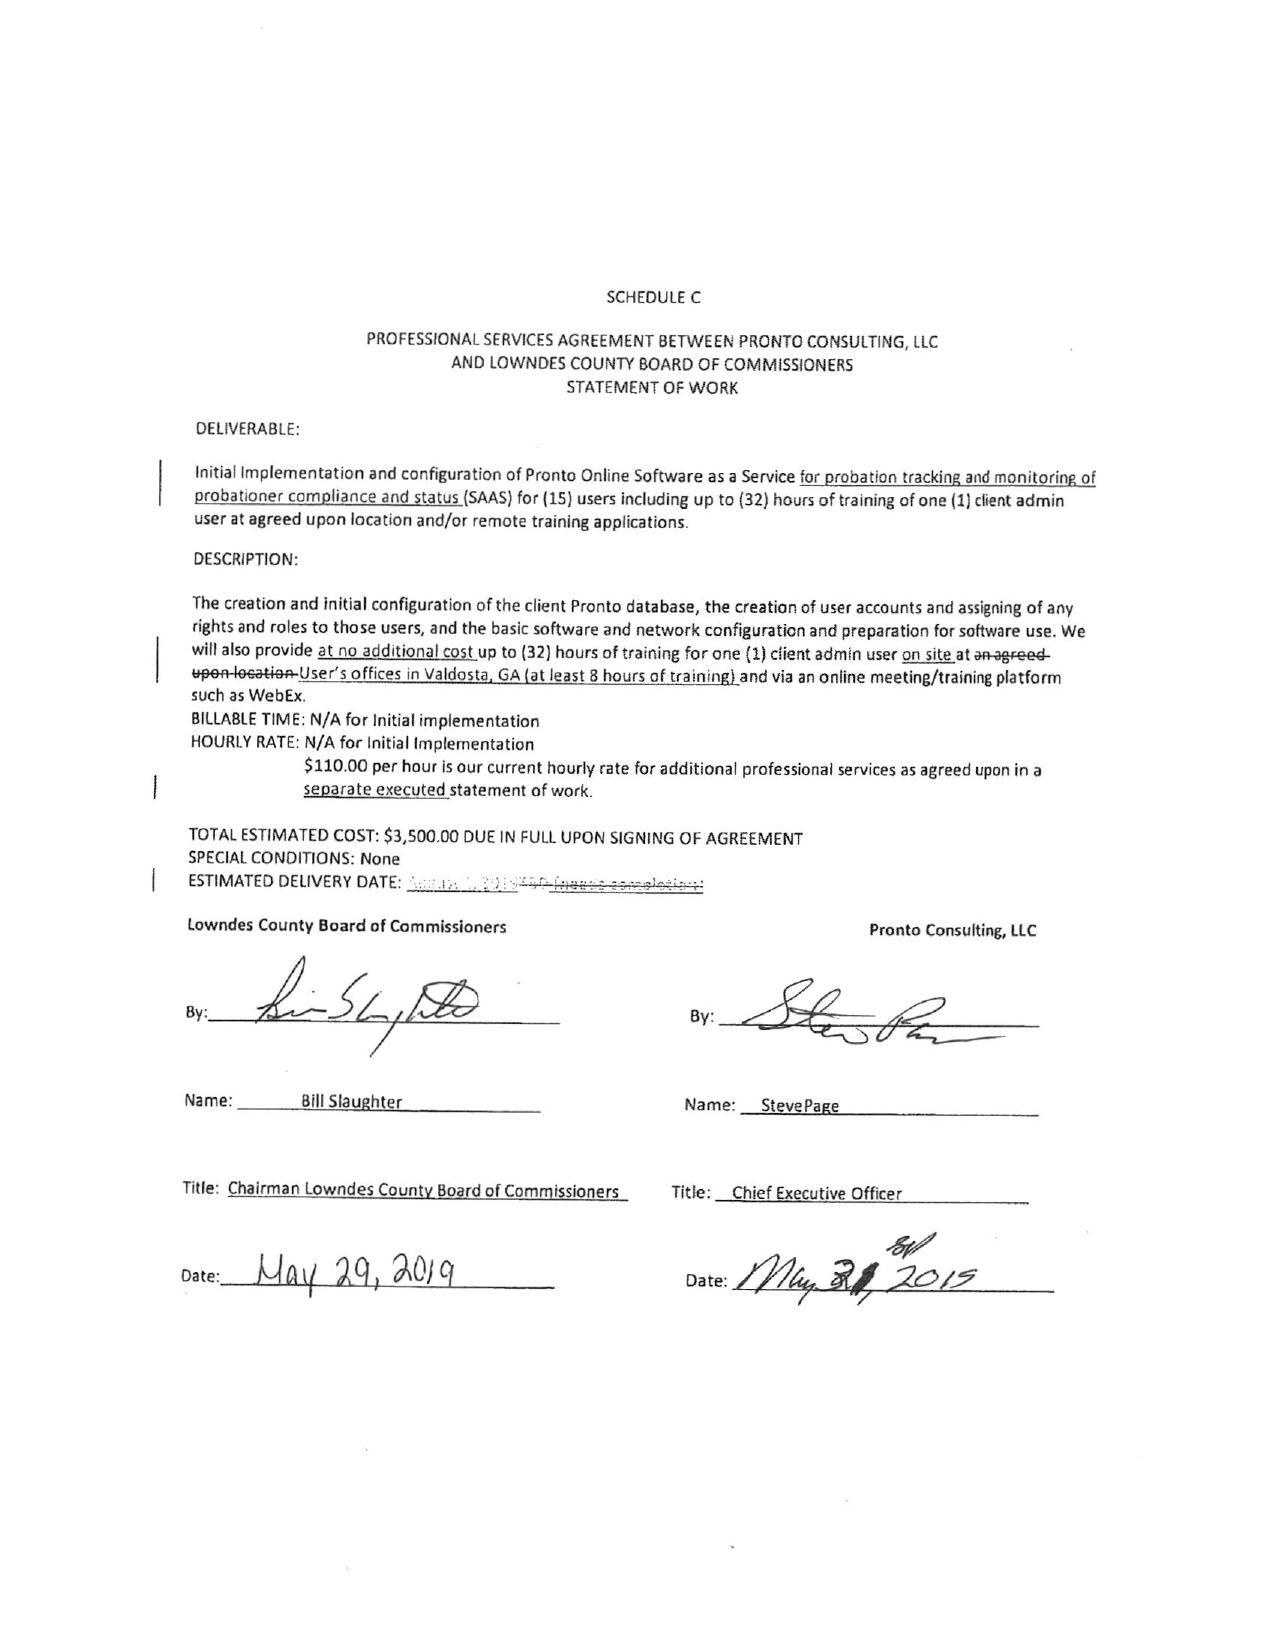 TOTAL ESTIMATED COST: $3,500.00 DUE IN FULL UPON SIGNING OF AGREEMENT with 2019 signatures